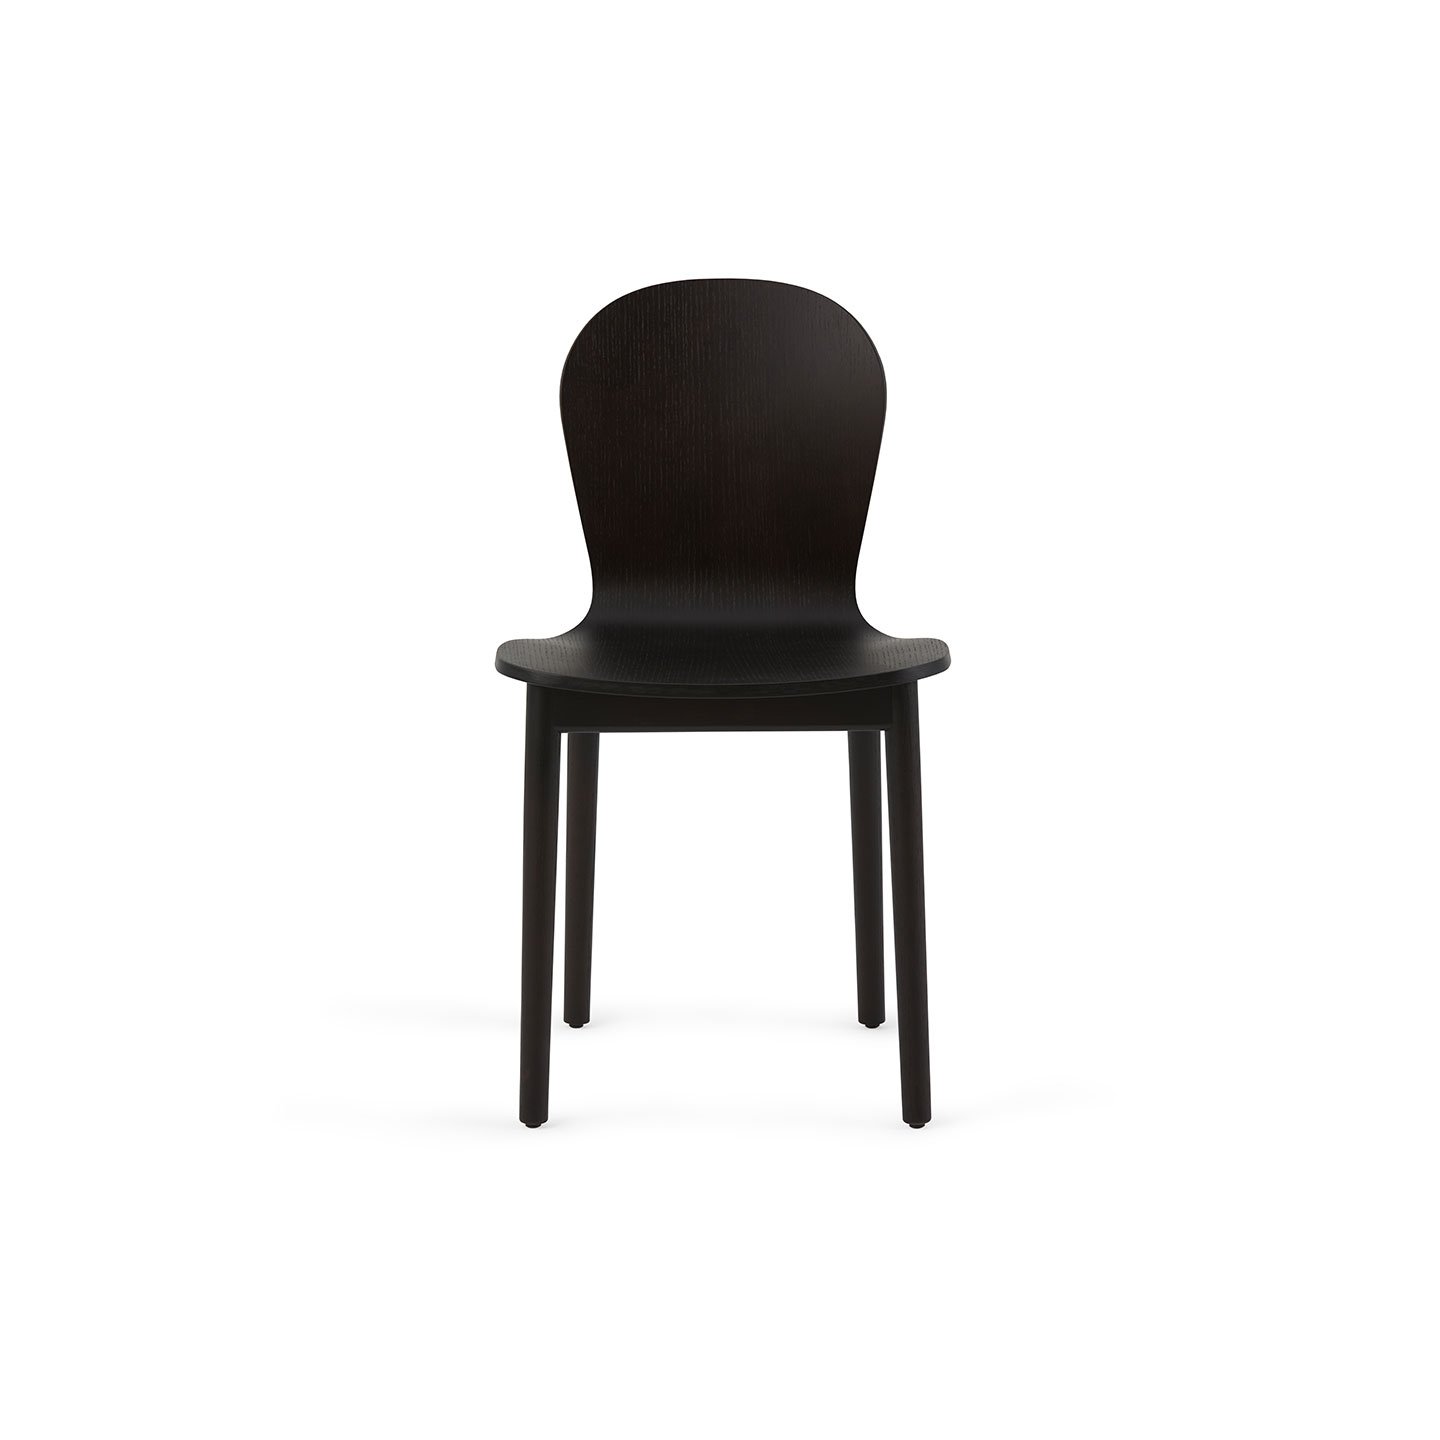 Haworth Bac Two side chair in dark brown wood front view